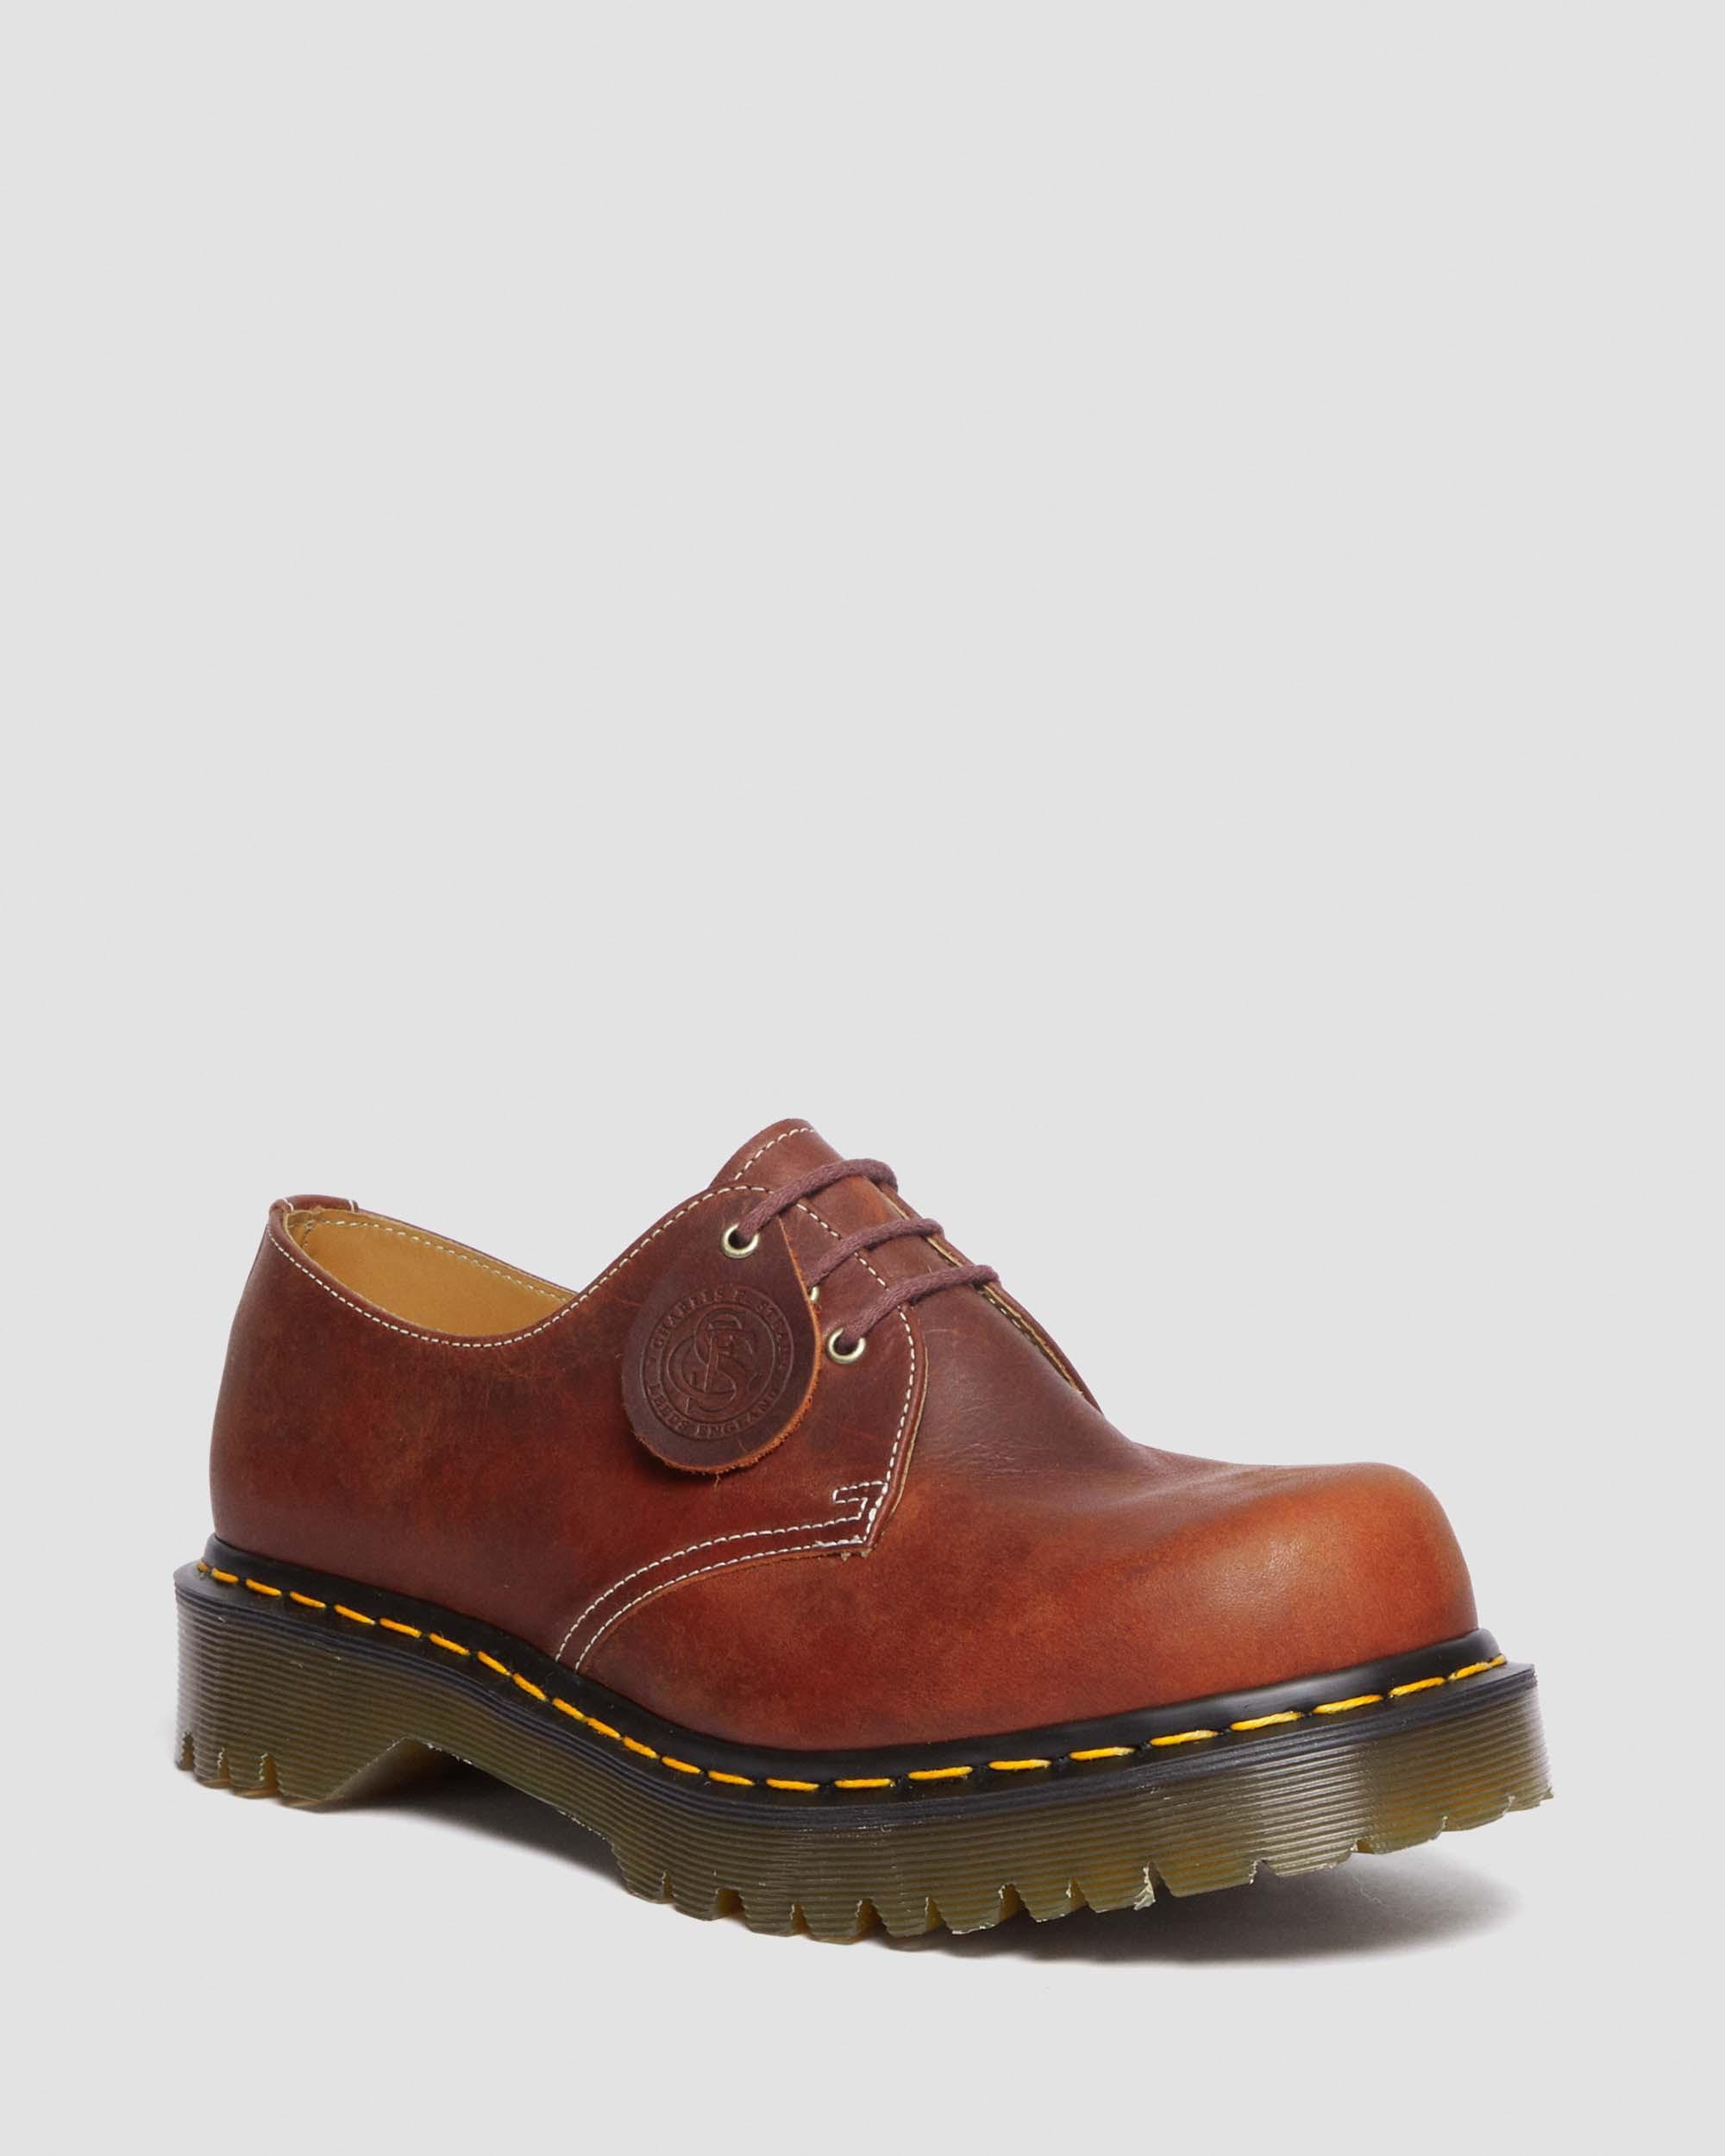 Dr. Martens 1461 Made In England Heritage Leather Oxford Shoes in Brown |  Lyst